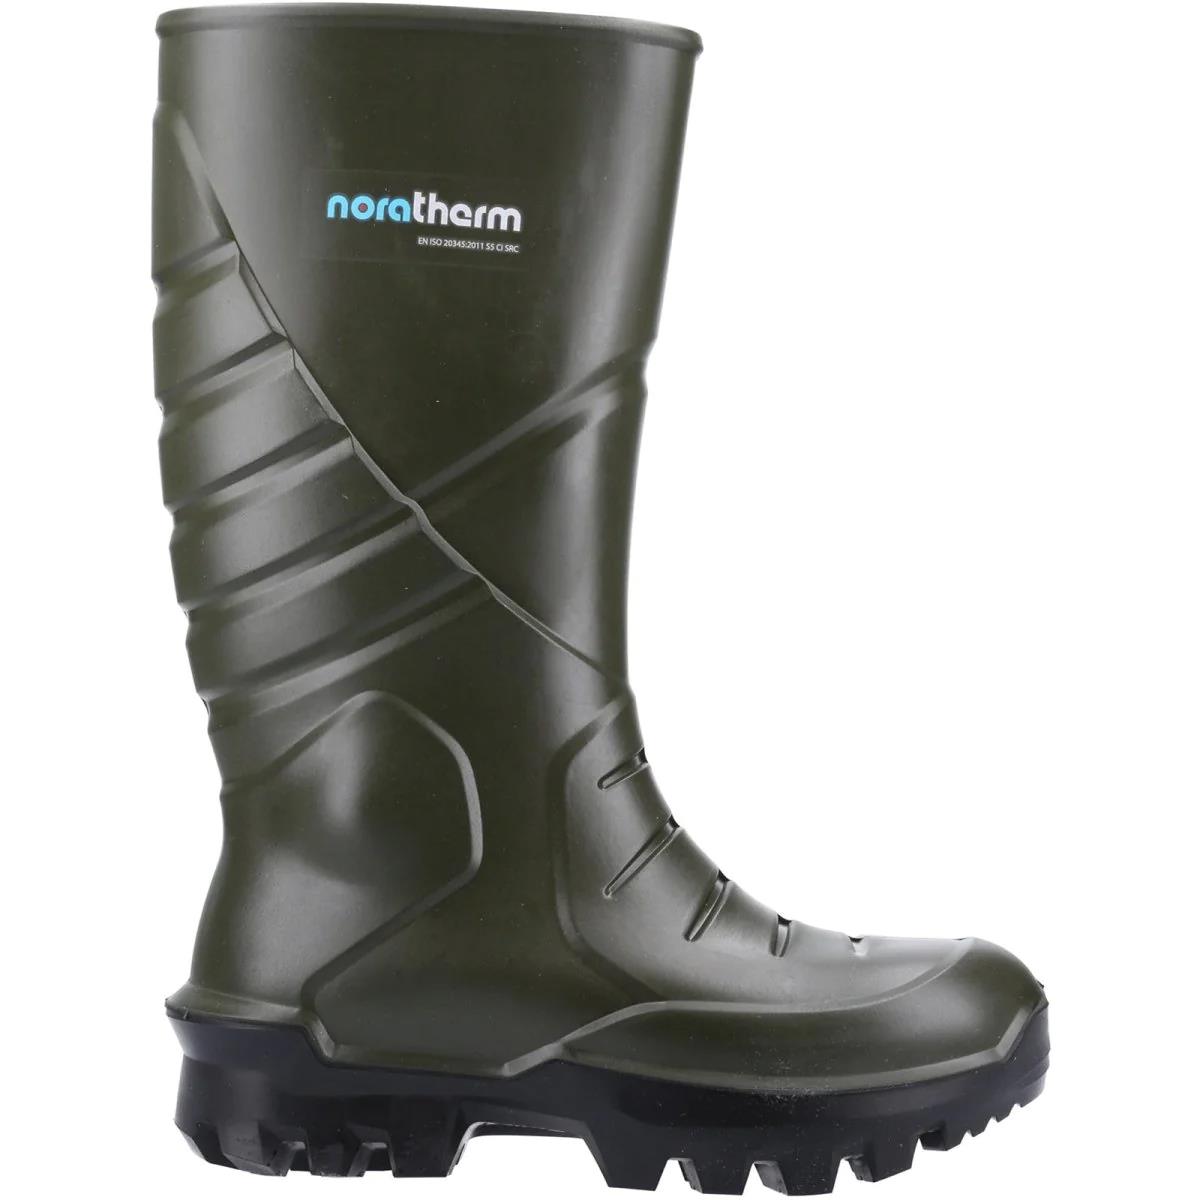 Nora Noramax S5 Green Farming Agricultural Lightweight Safety Wellies Boots